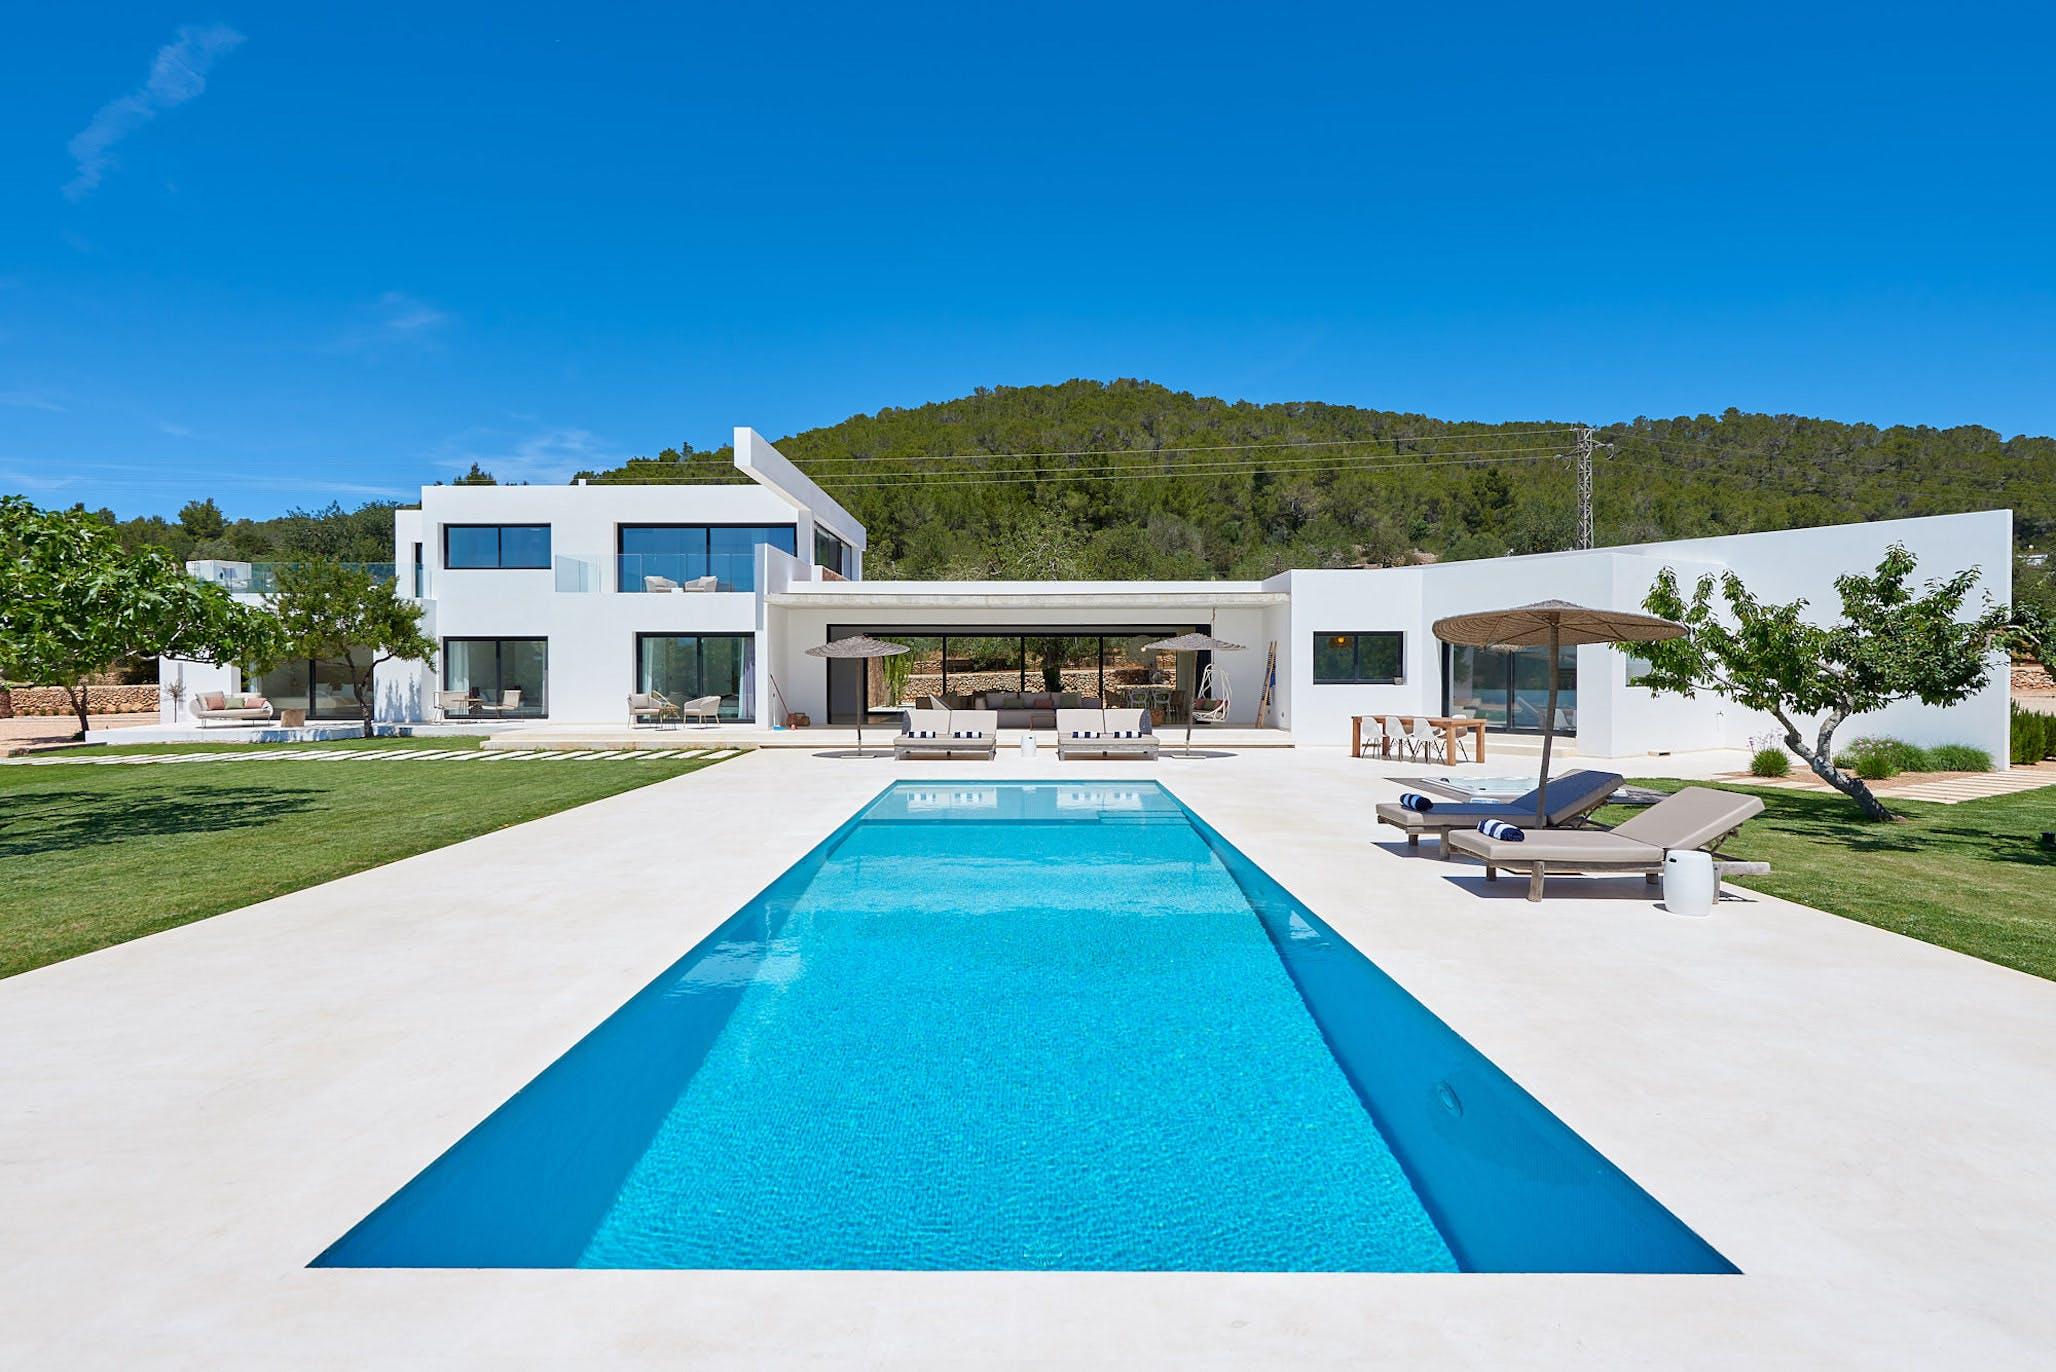 You are currently viewing Can Pegaso Grande – ‘Exquisite luxury villa in the North.’